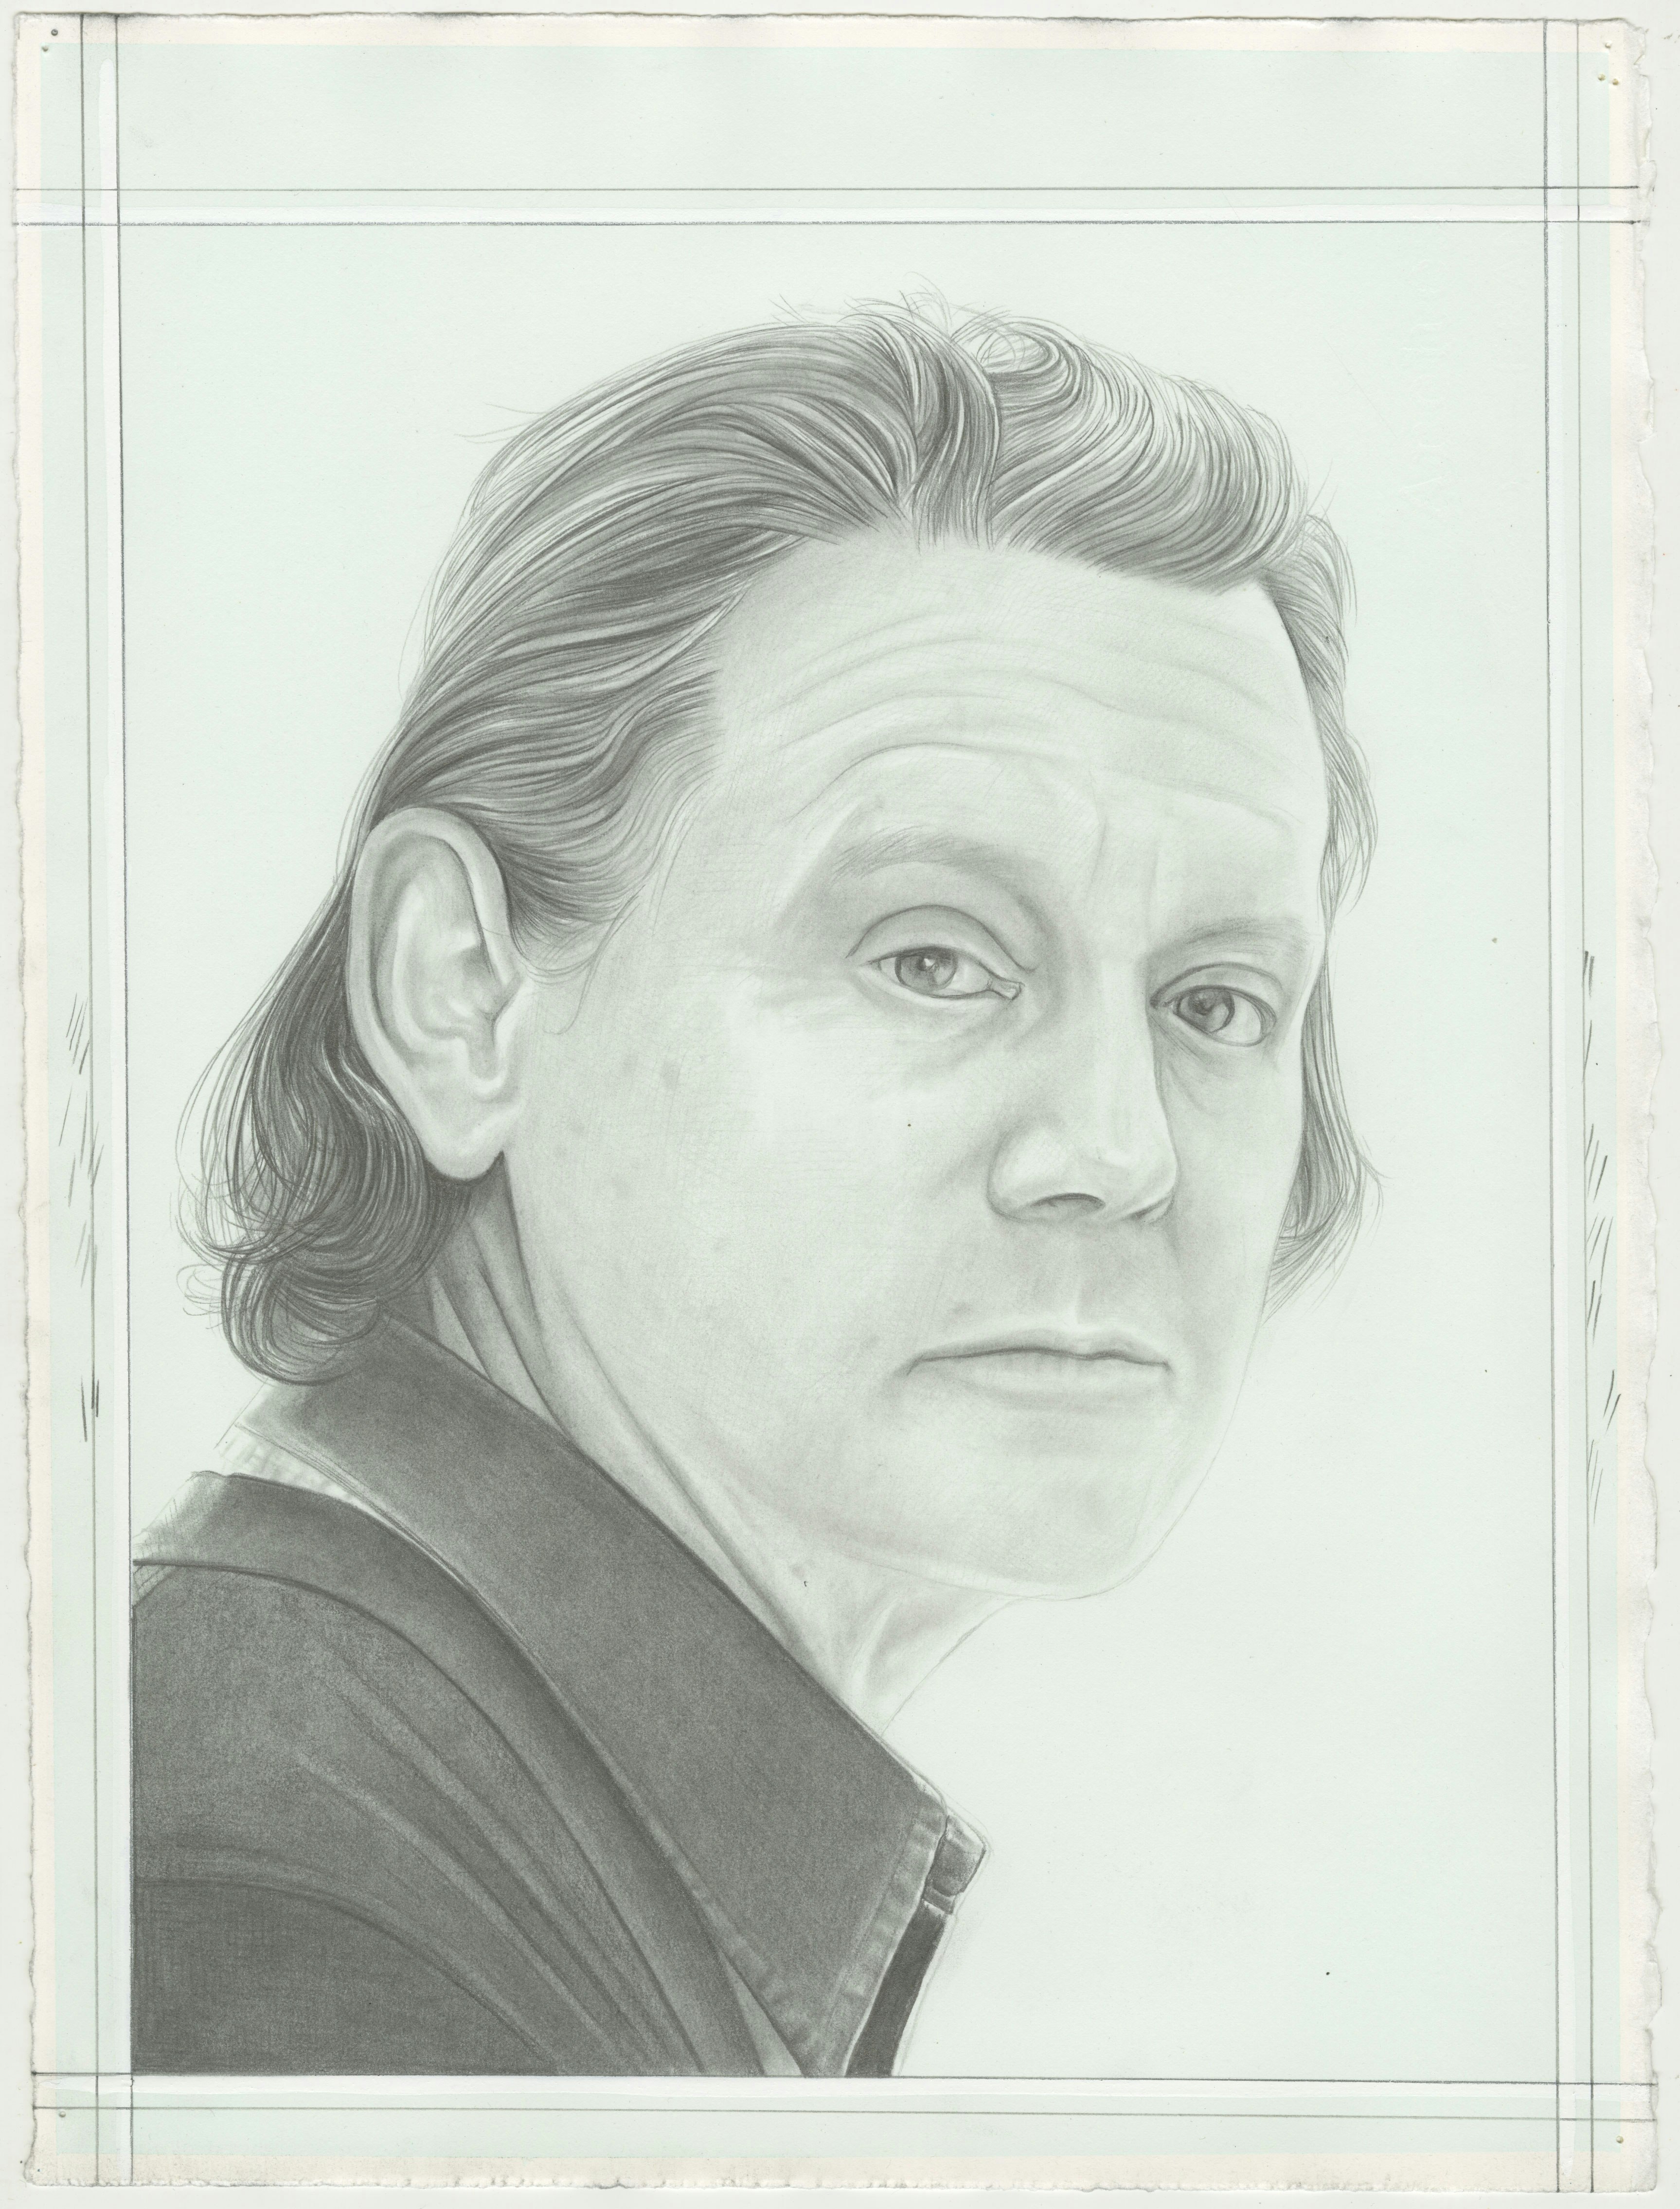 Portrait of Jeff Wall, pencil on paper by Phong H. Bui.